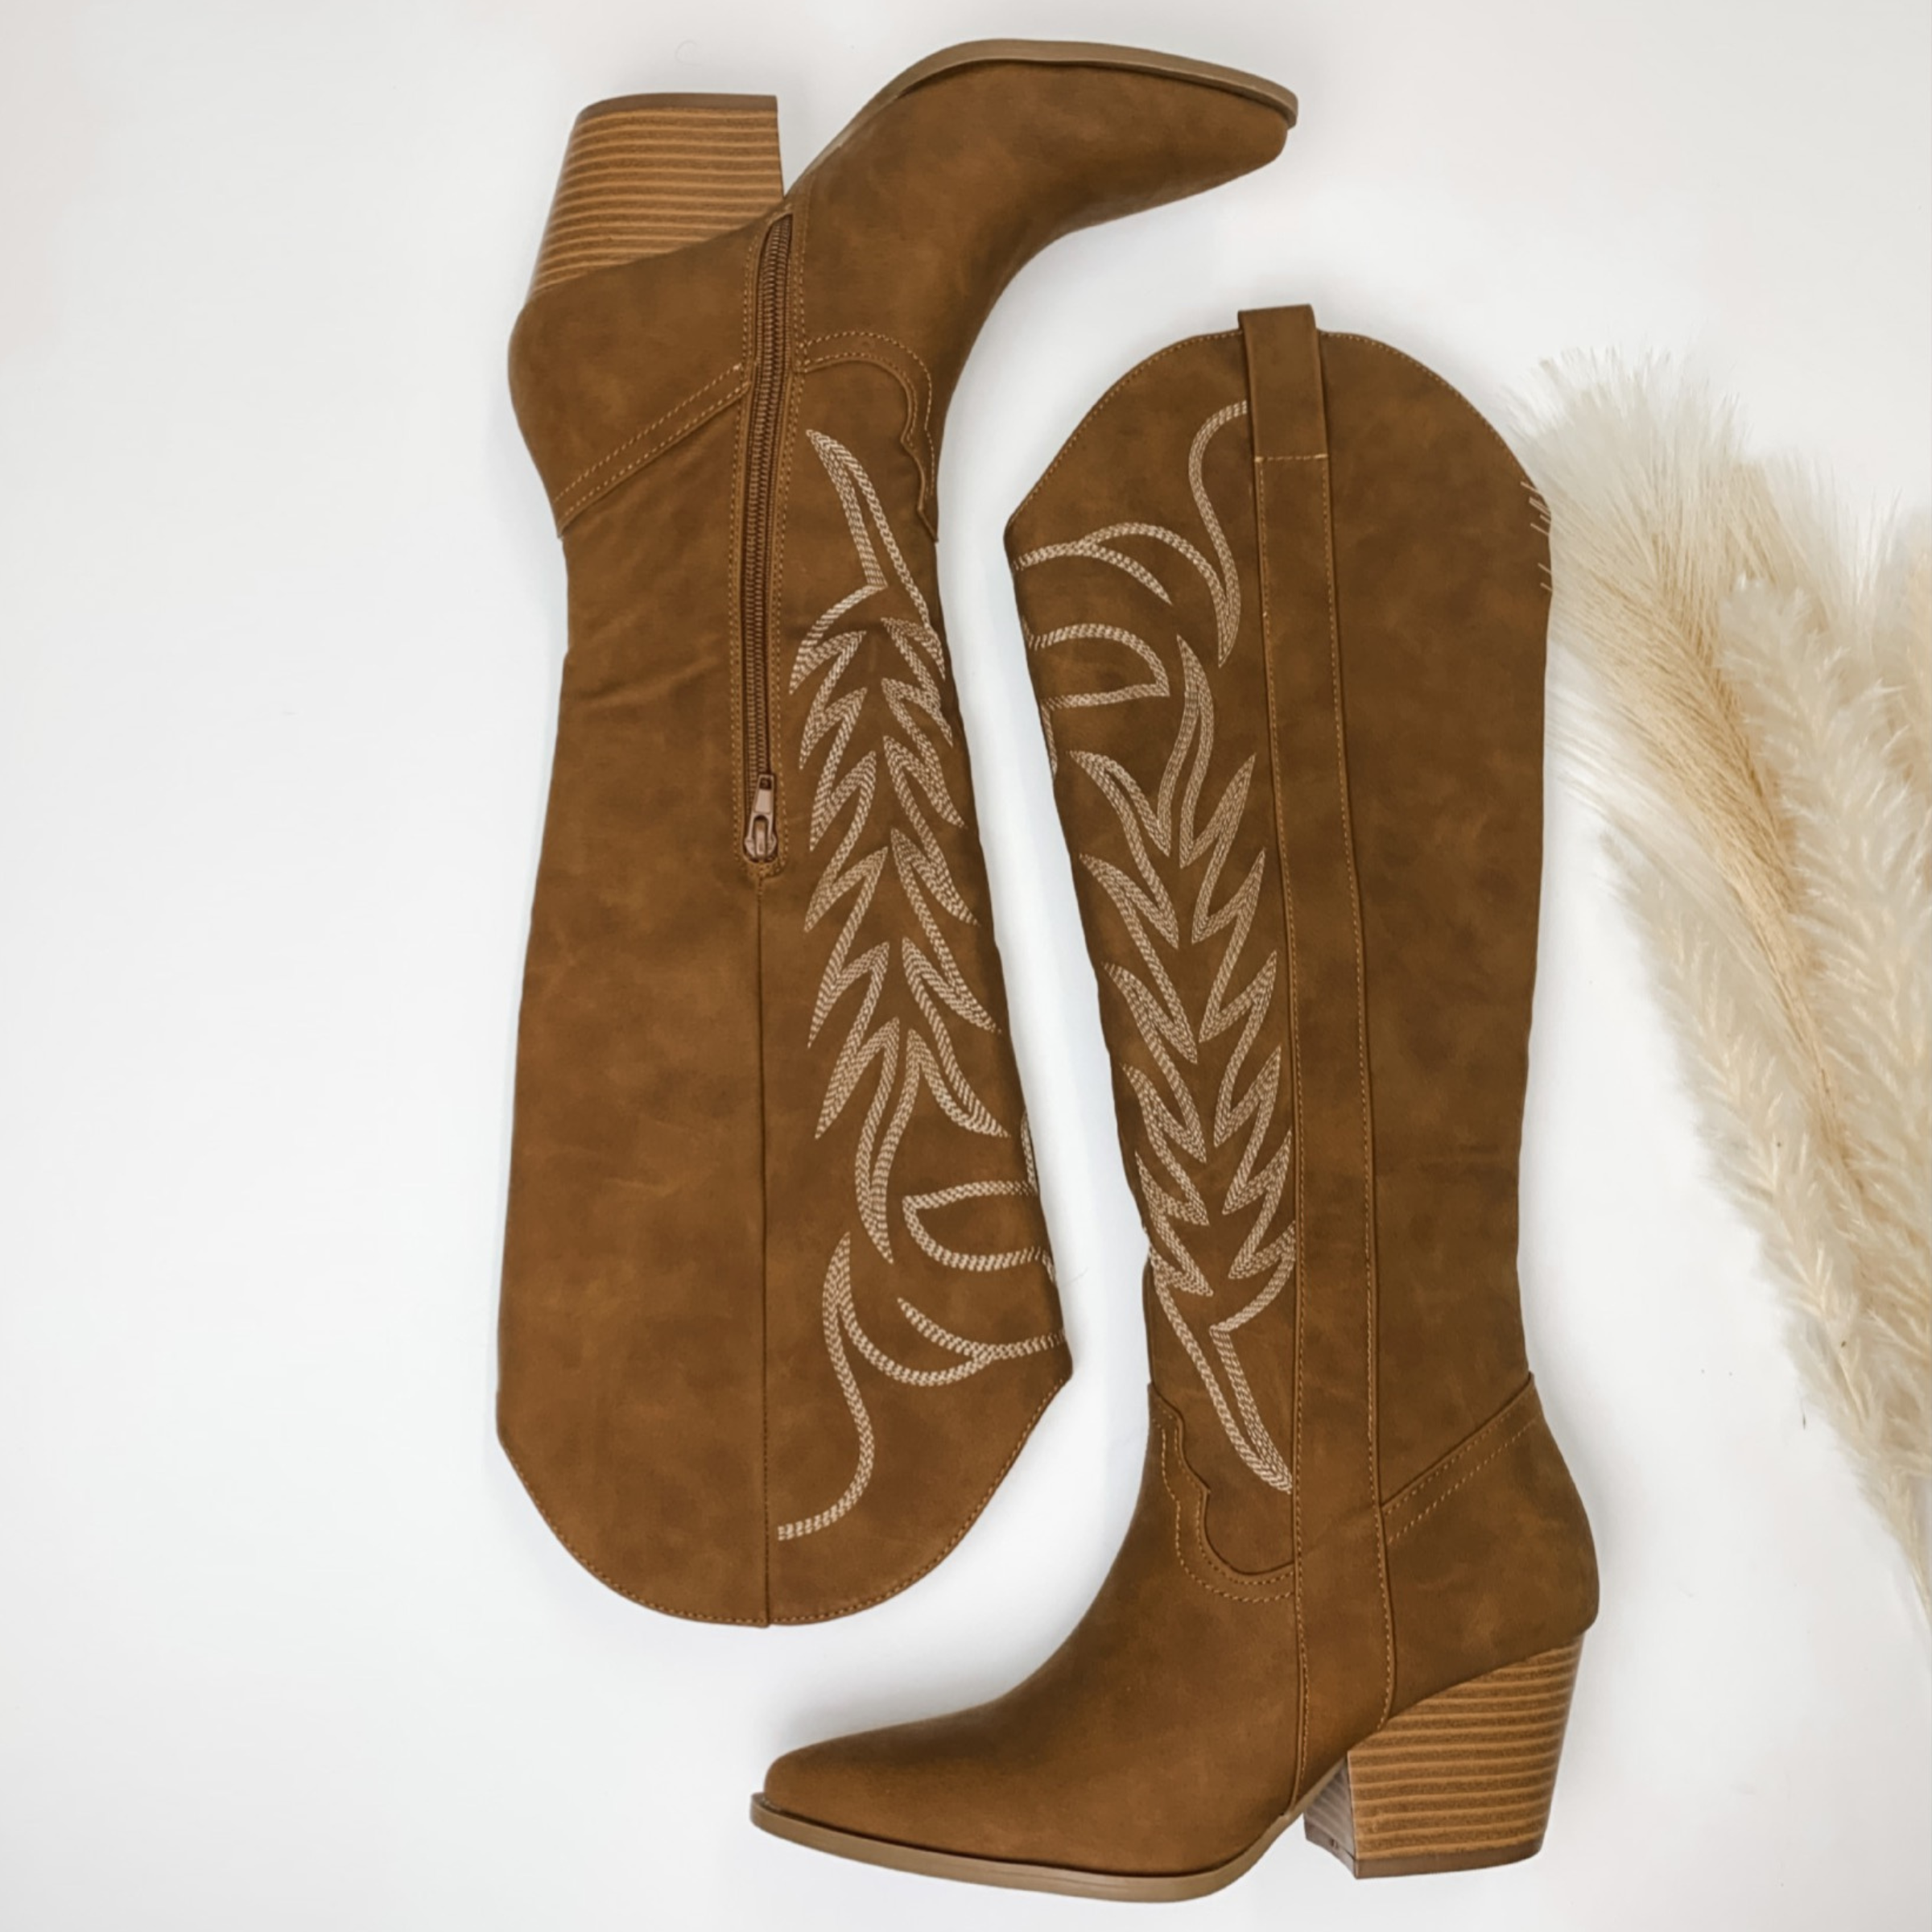 Rodeo Ready Knee High Western Stitch Boots in Camel Brown